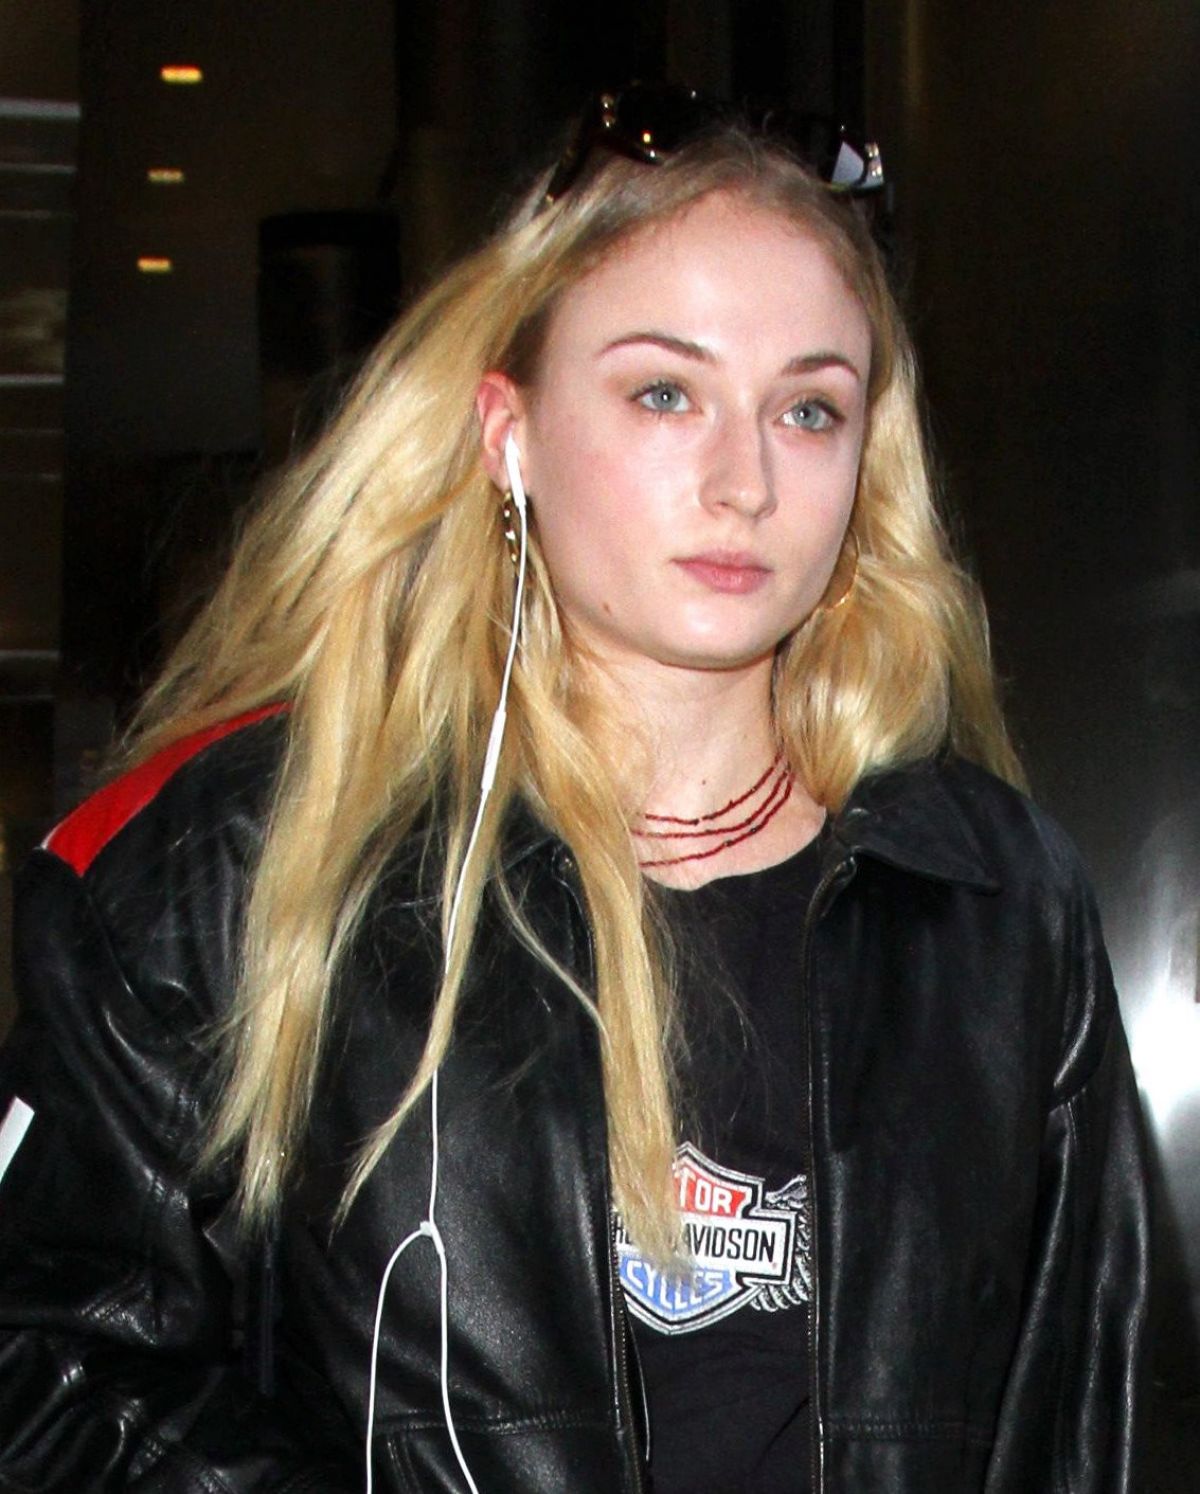 SOPHIE TURNER at LAX Airport in Los Angeles 02/08/2017 – HawtCelebs